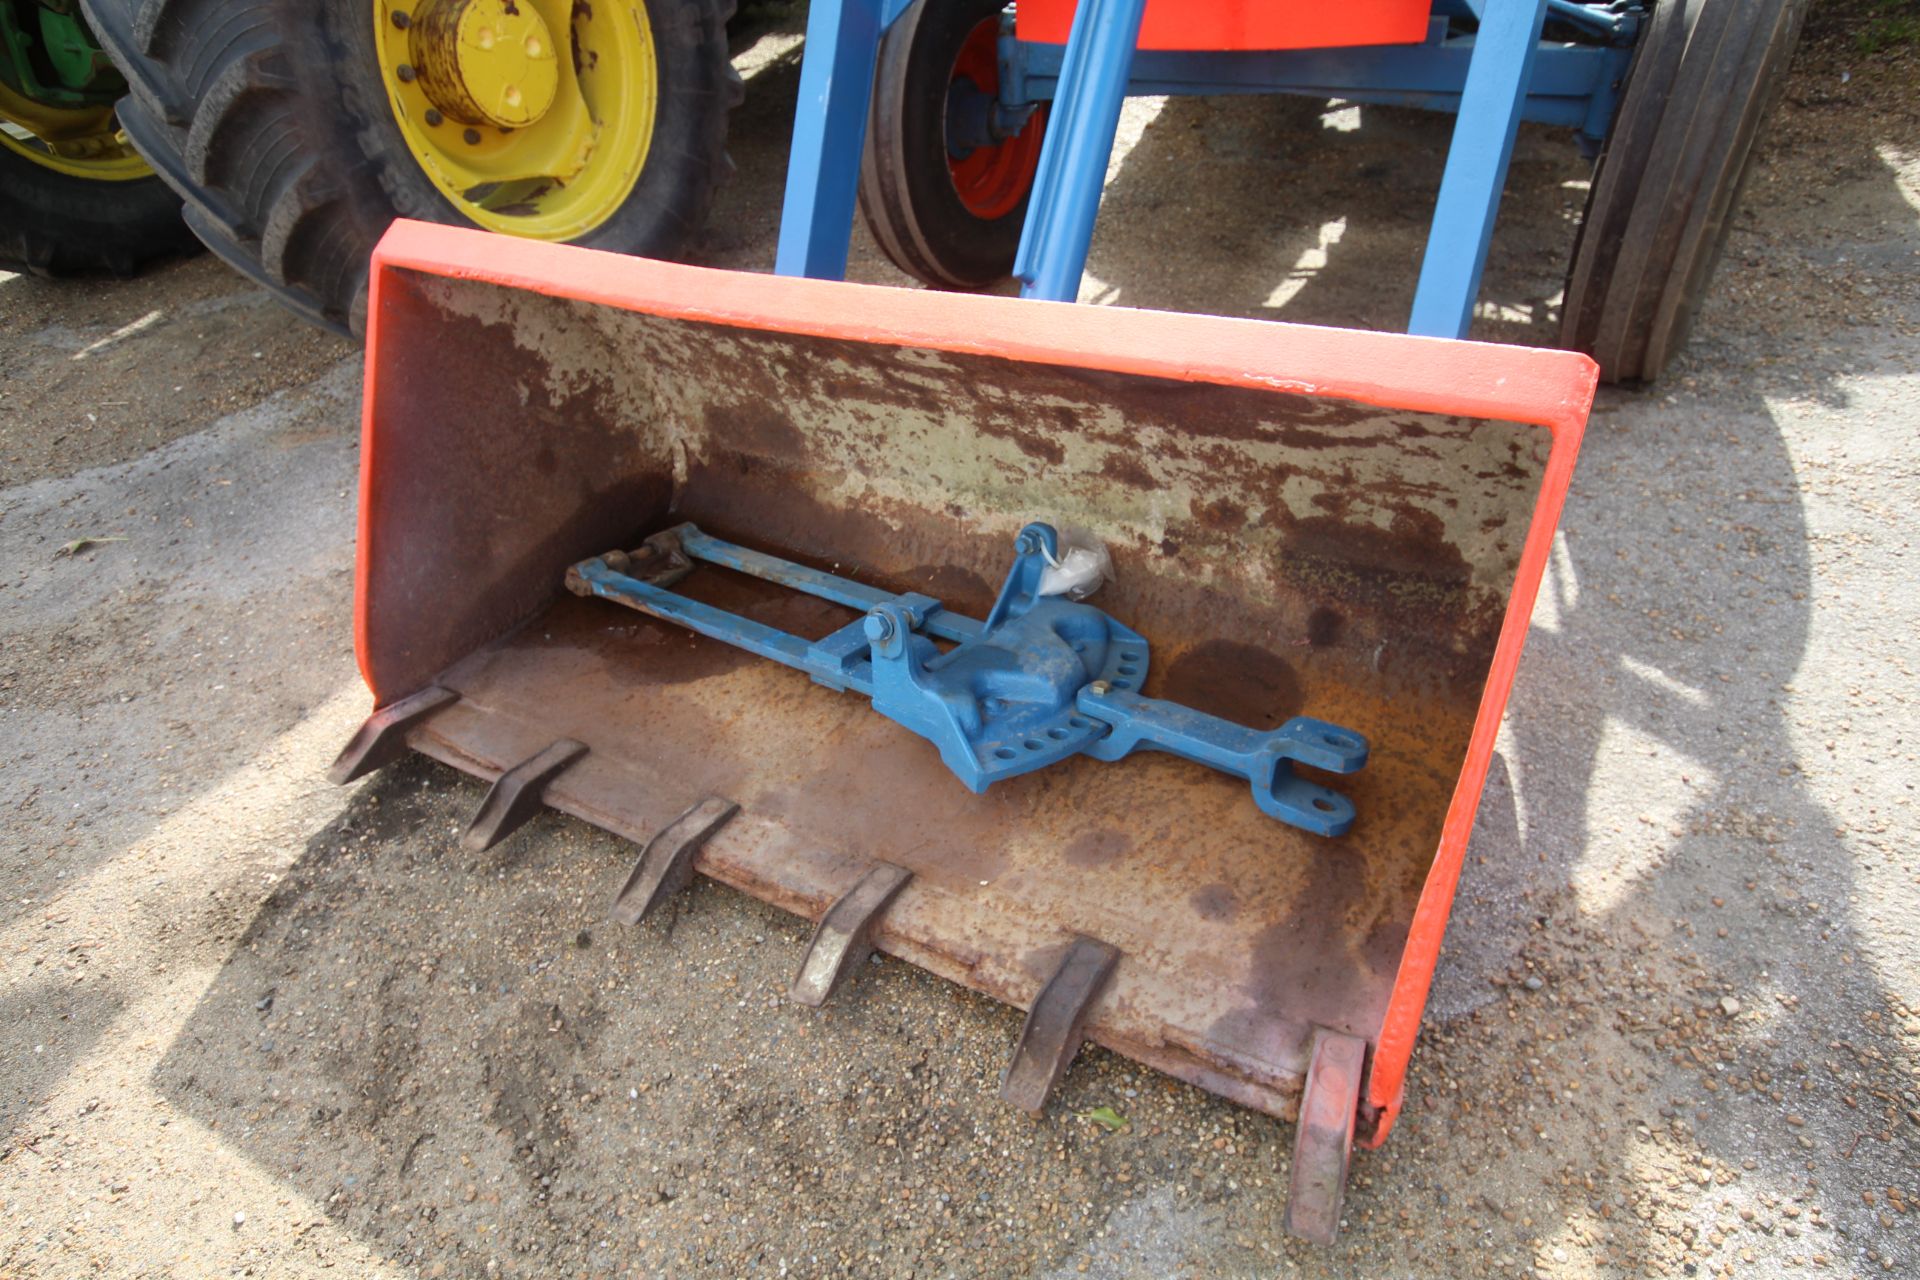 Fordson Power Major 2WD tractor. Registration 708 GUR (no paperwork). 12.4-36 rear wheels and - Image 6 of 54